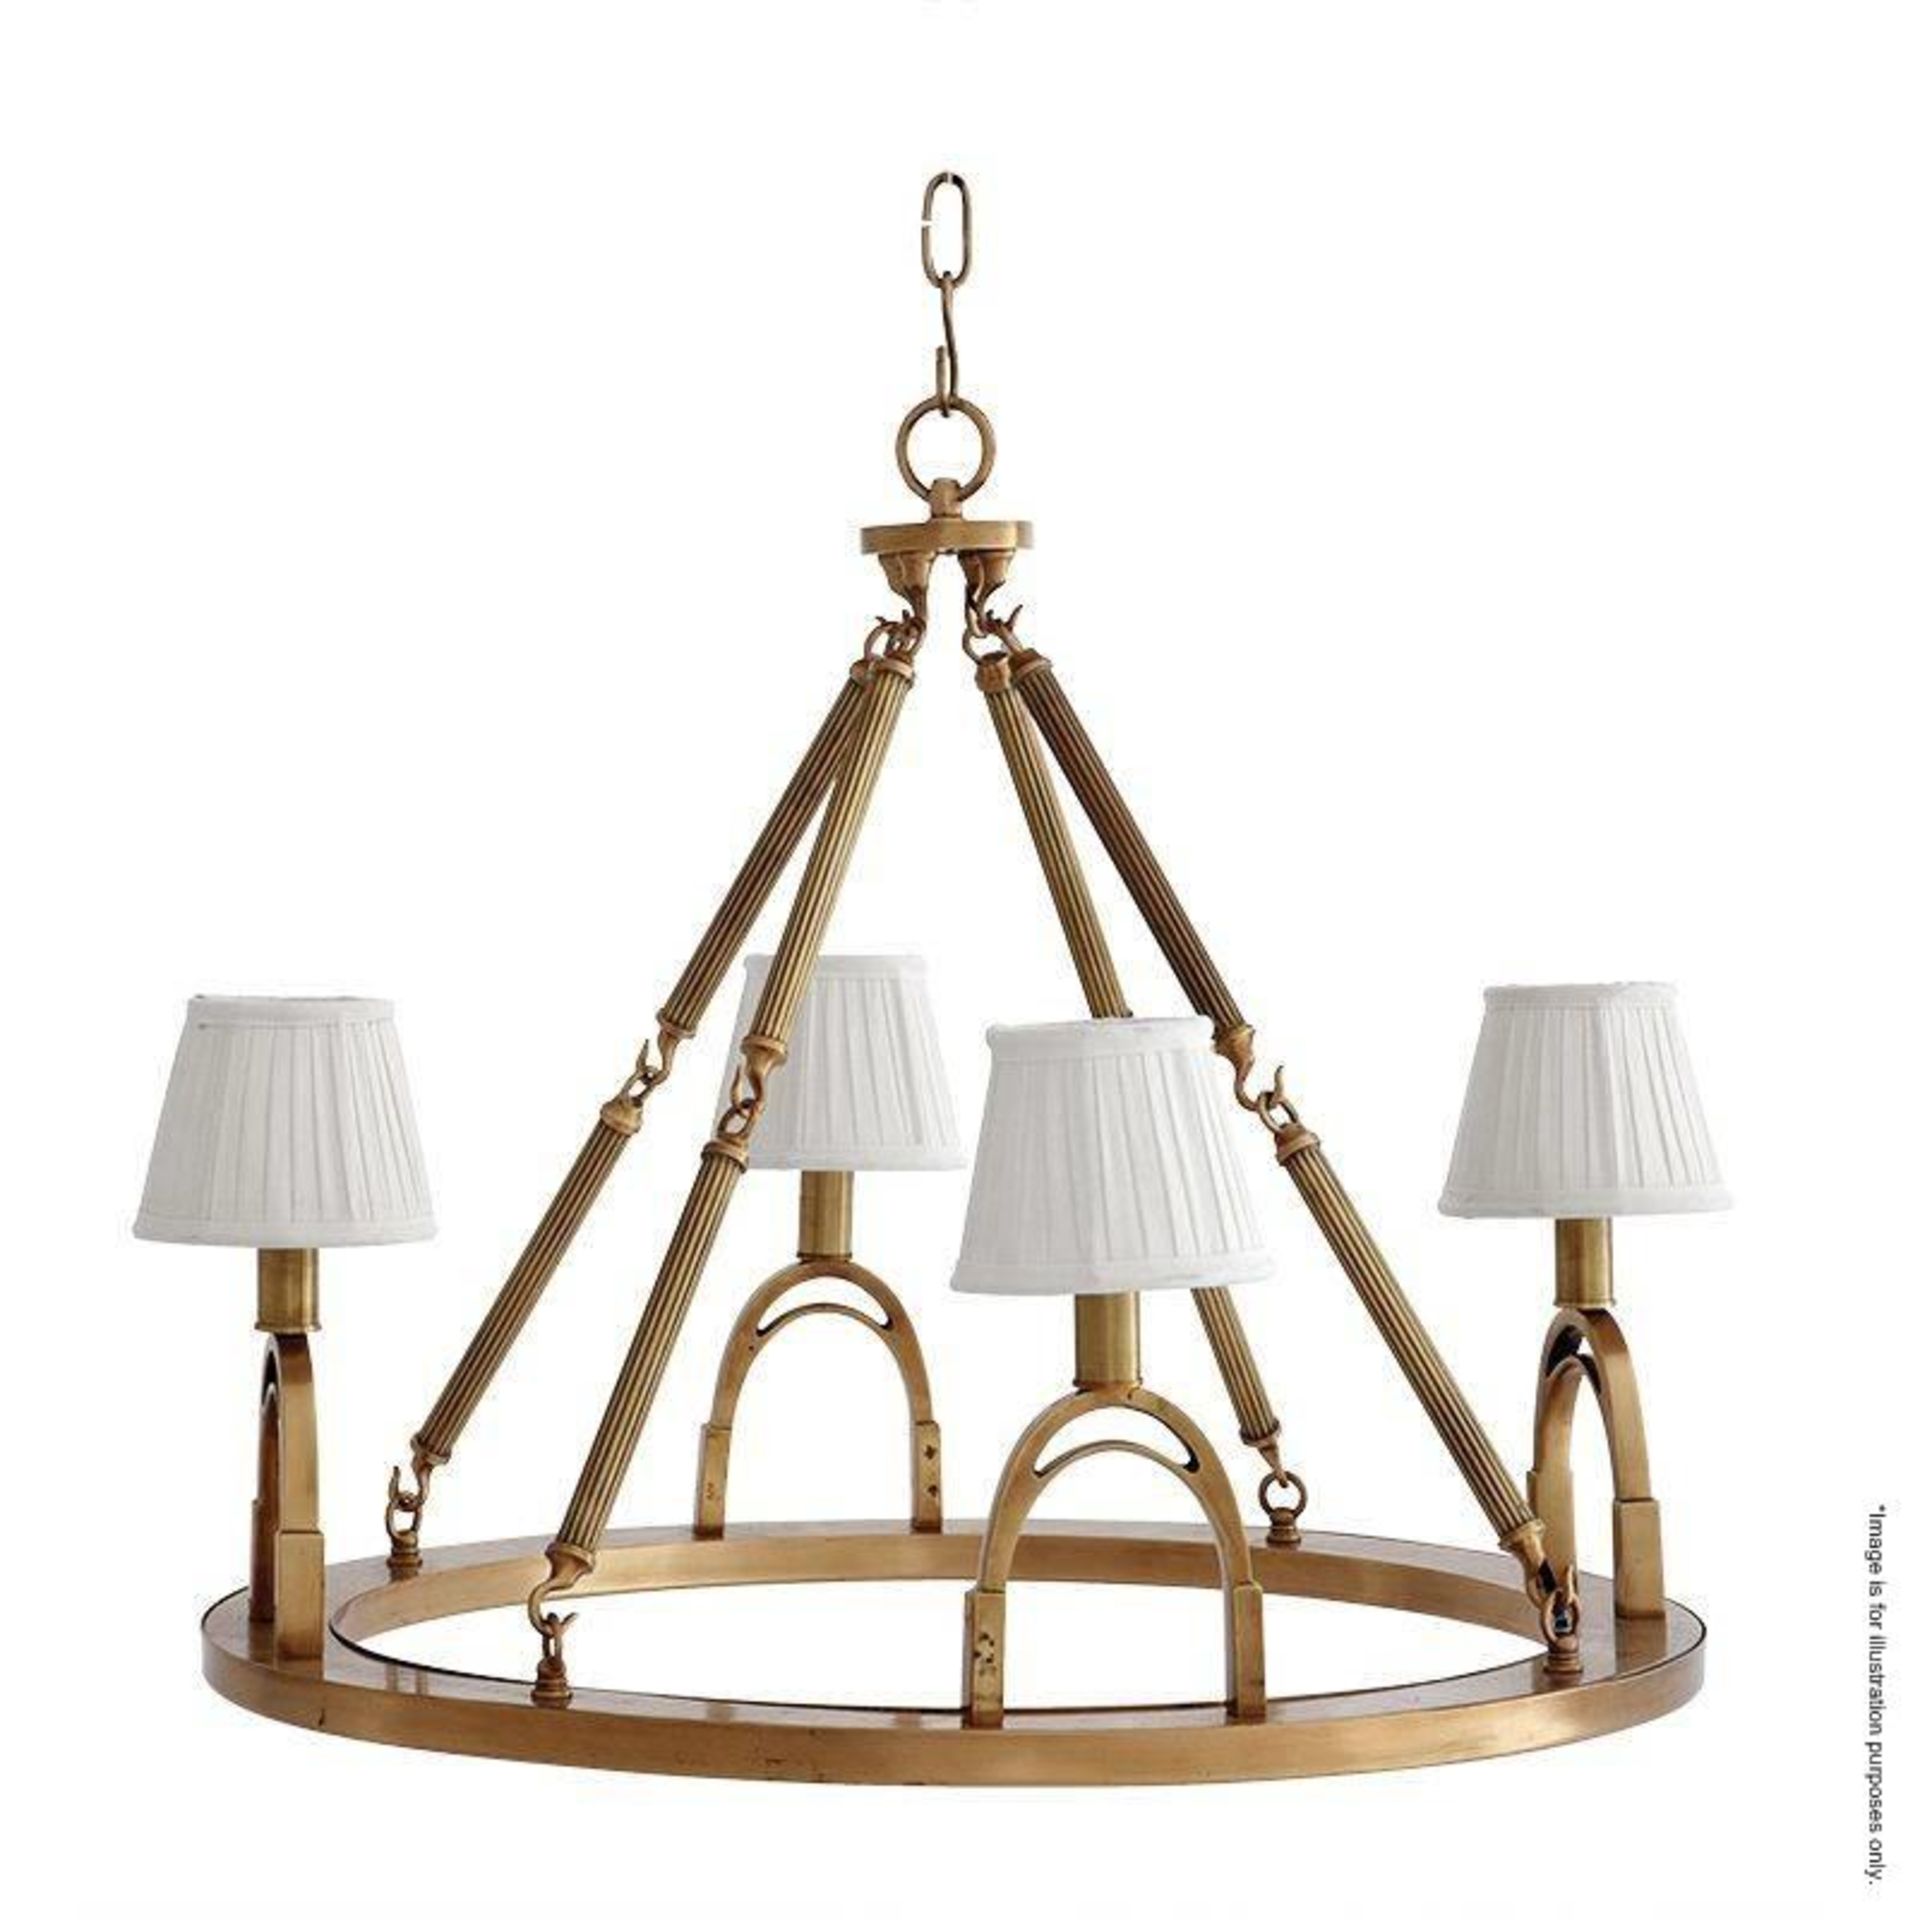 1 x Eichholtz 'Jigger' Equestrian-inspired Chandelier With An Aged Brass Finish - Includes 2 x Sets - Image 2 of 15